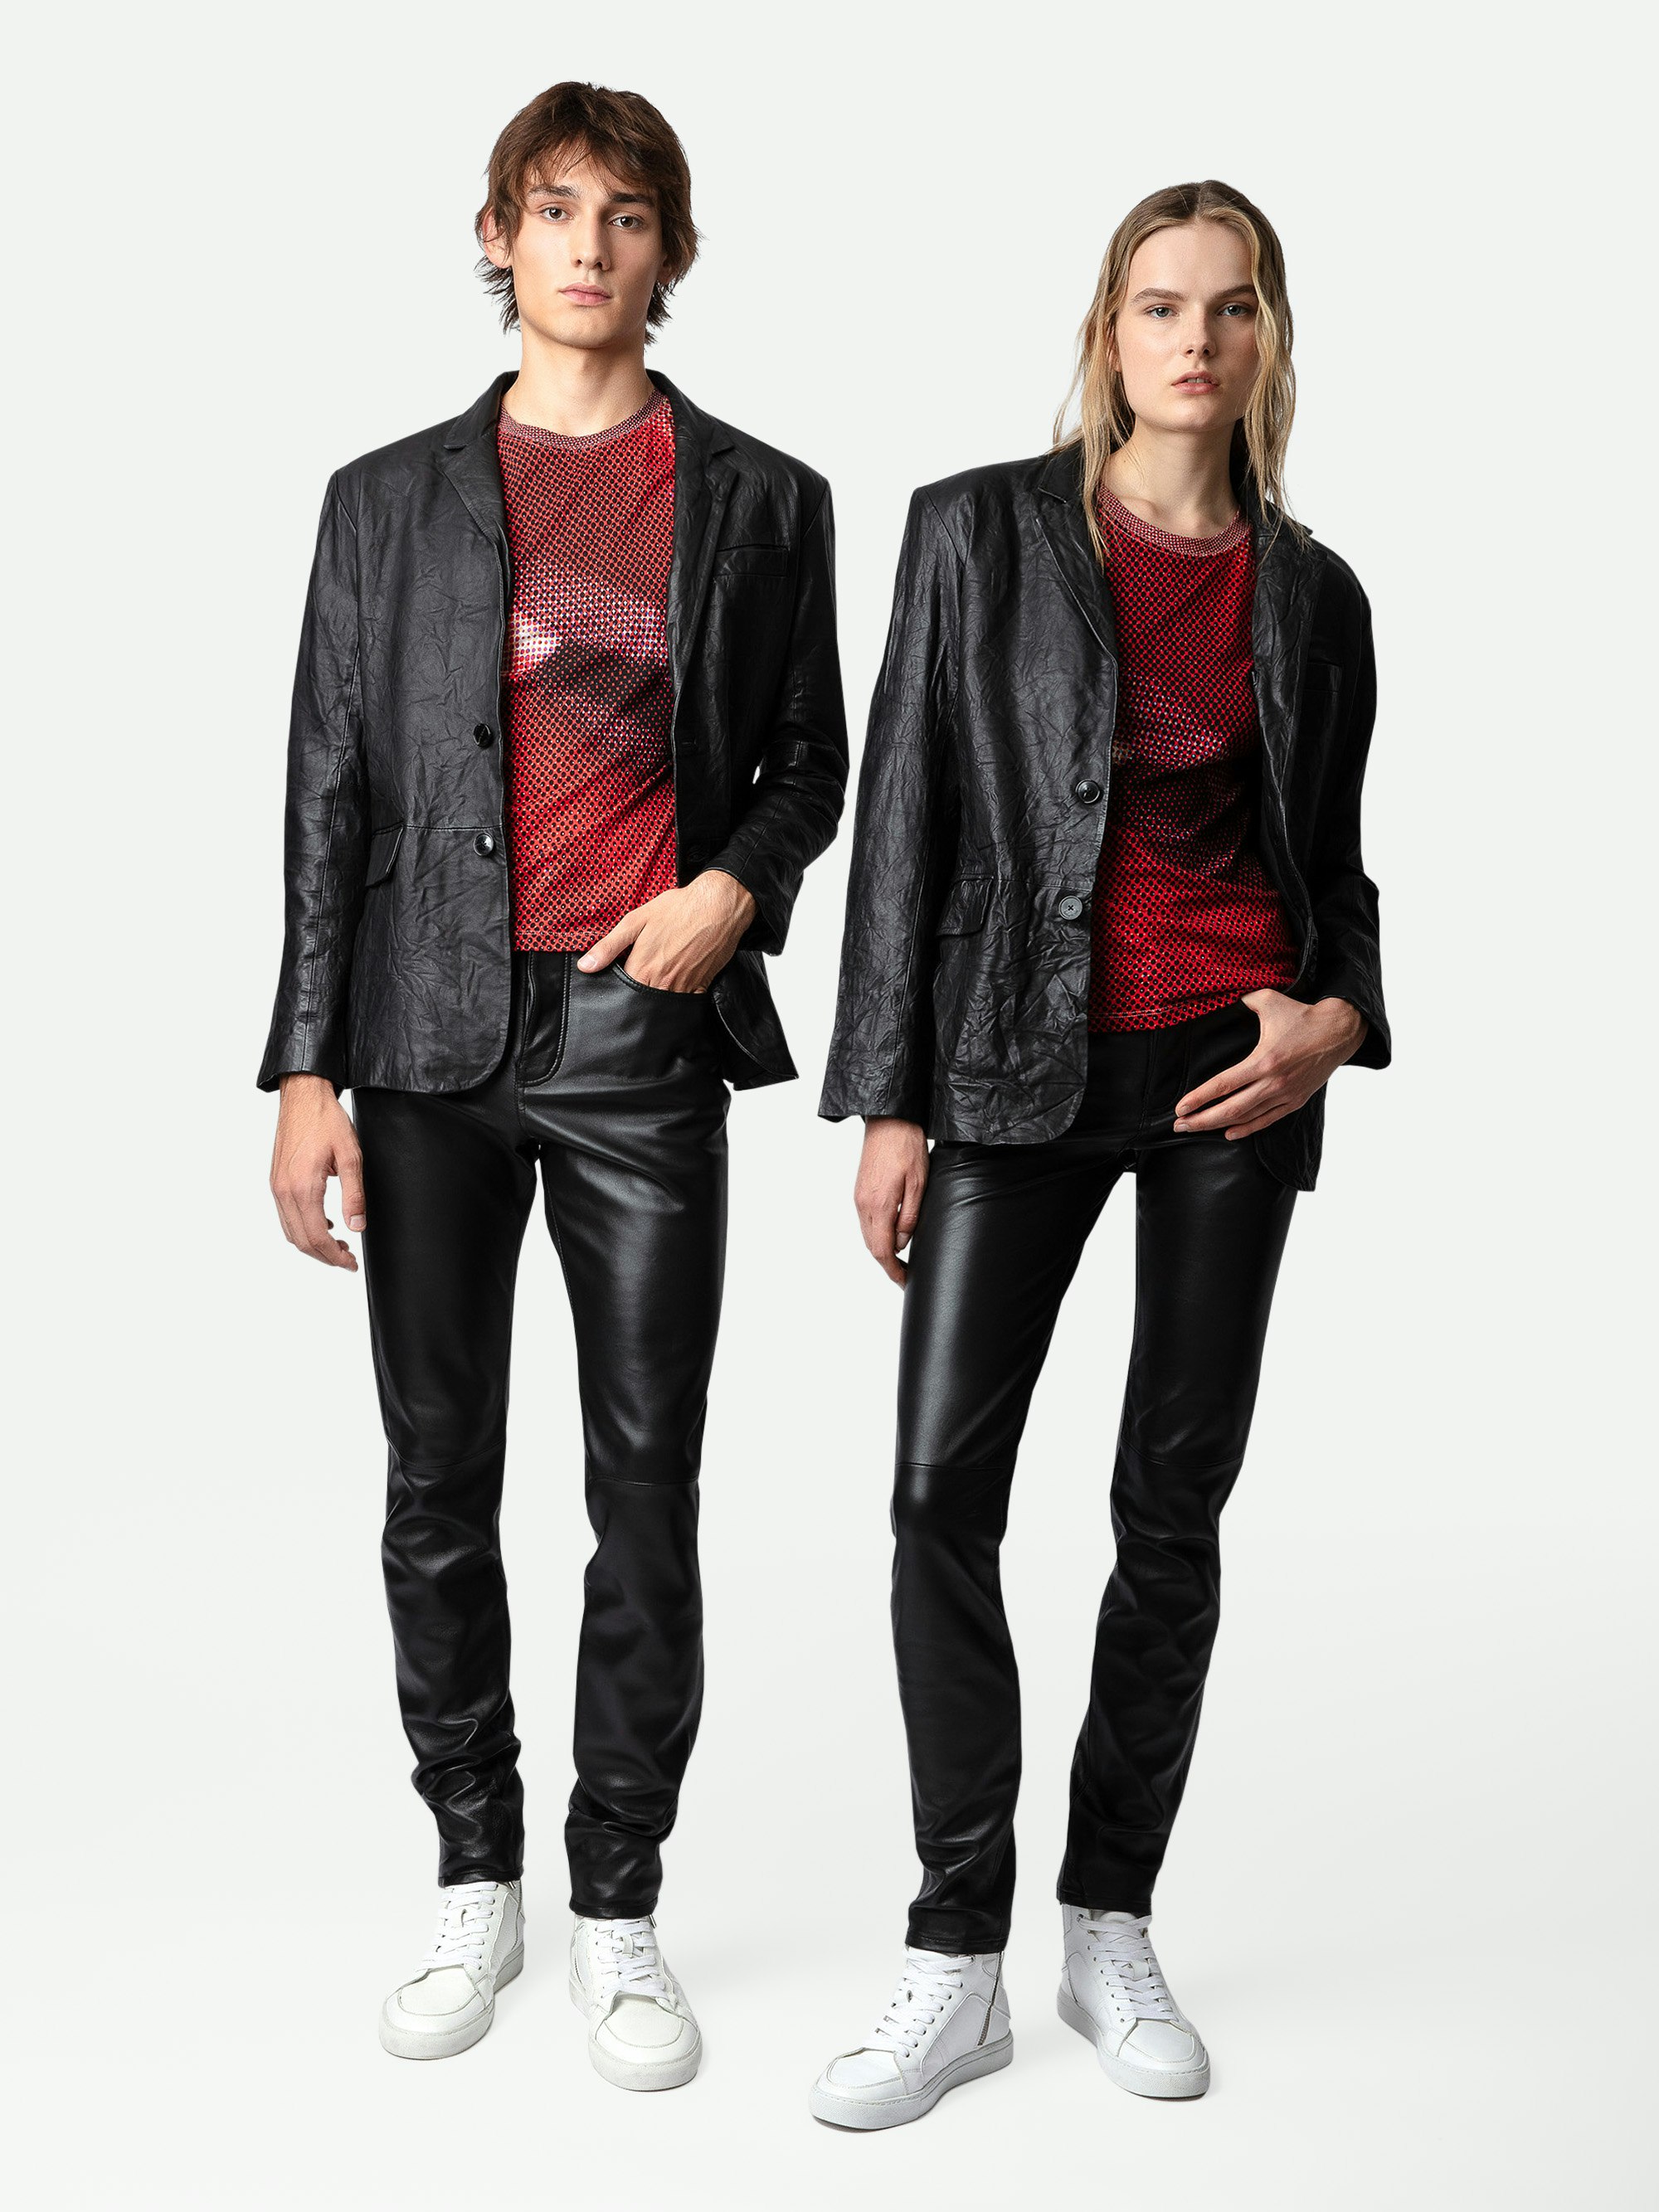 Valfried Crinkle Leather Blazer - Unisex’s black tailored jacket in crinkle leather.